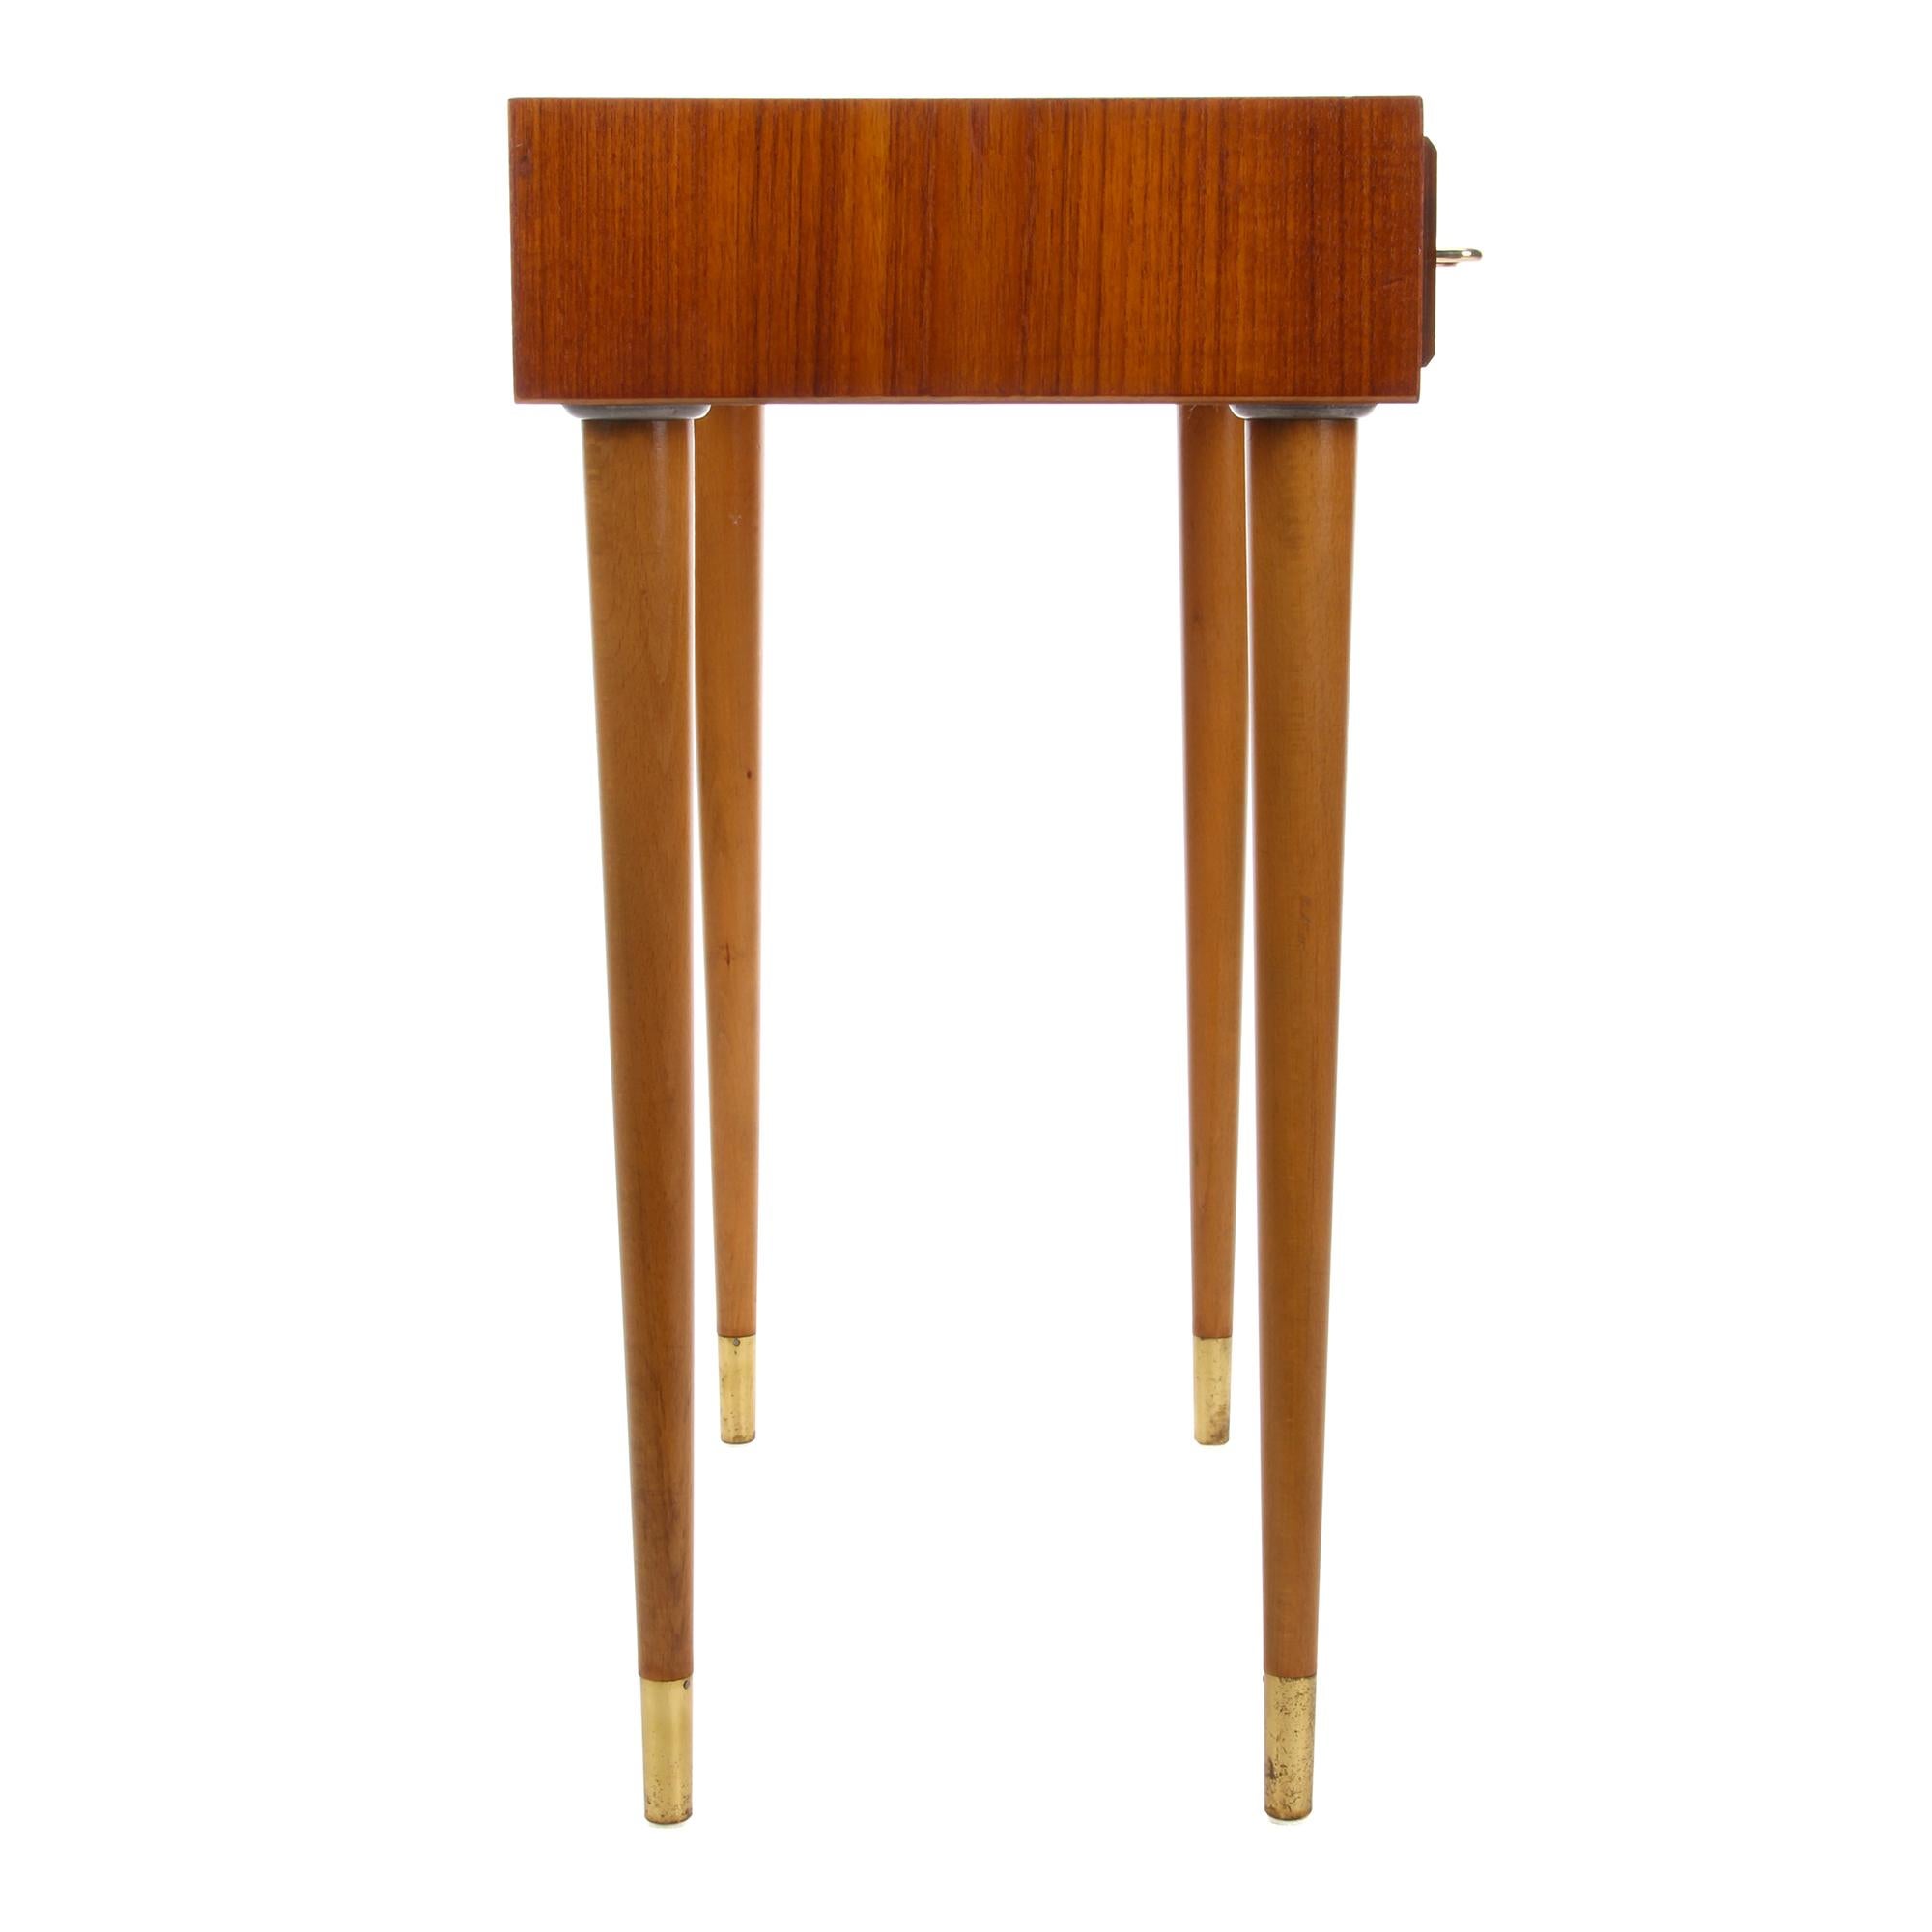 Teak Entry Table, 1960s Danish Console Table or Side Table with Two Drawers 1